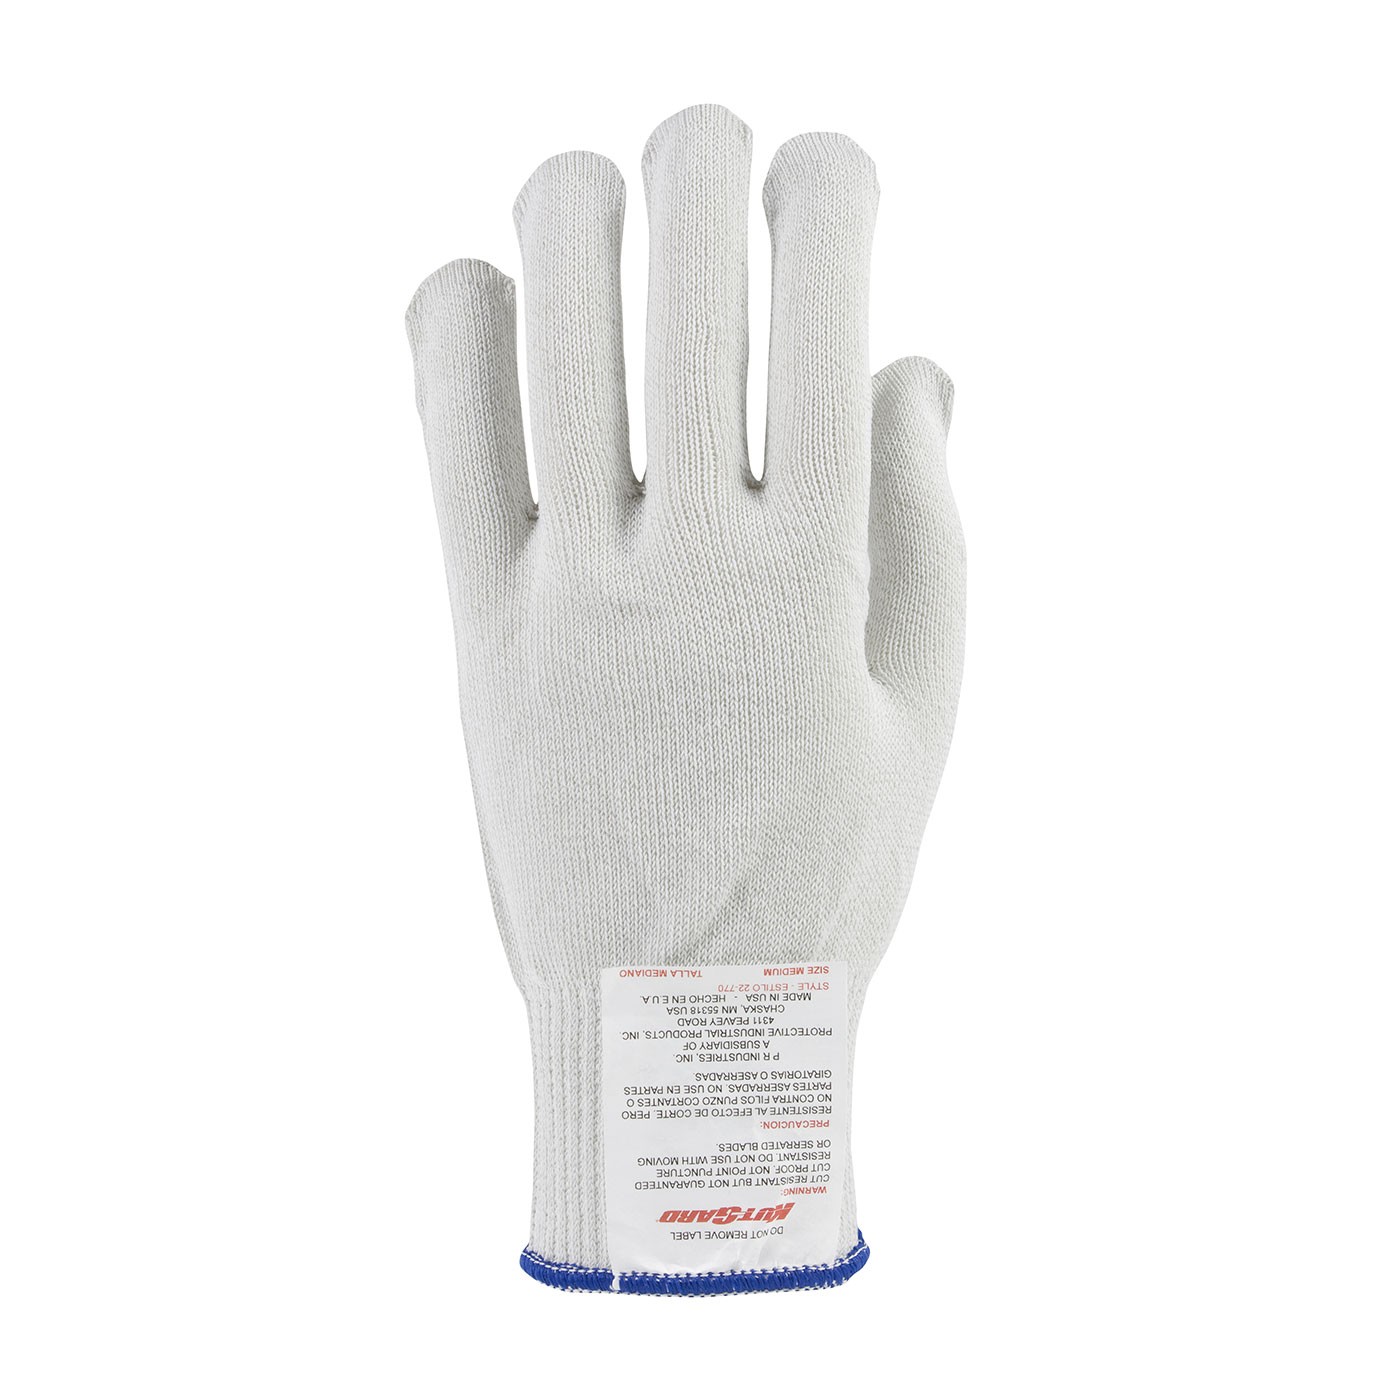 Kut Gard® Polyester over Dyneema® / Silica / Stainless Steel Core Antimicrobial Glove - Heavy Weight  (#22-770)